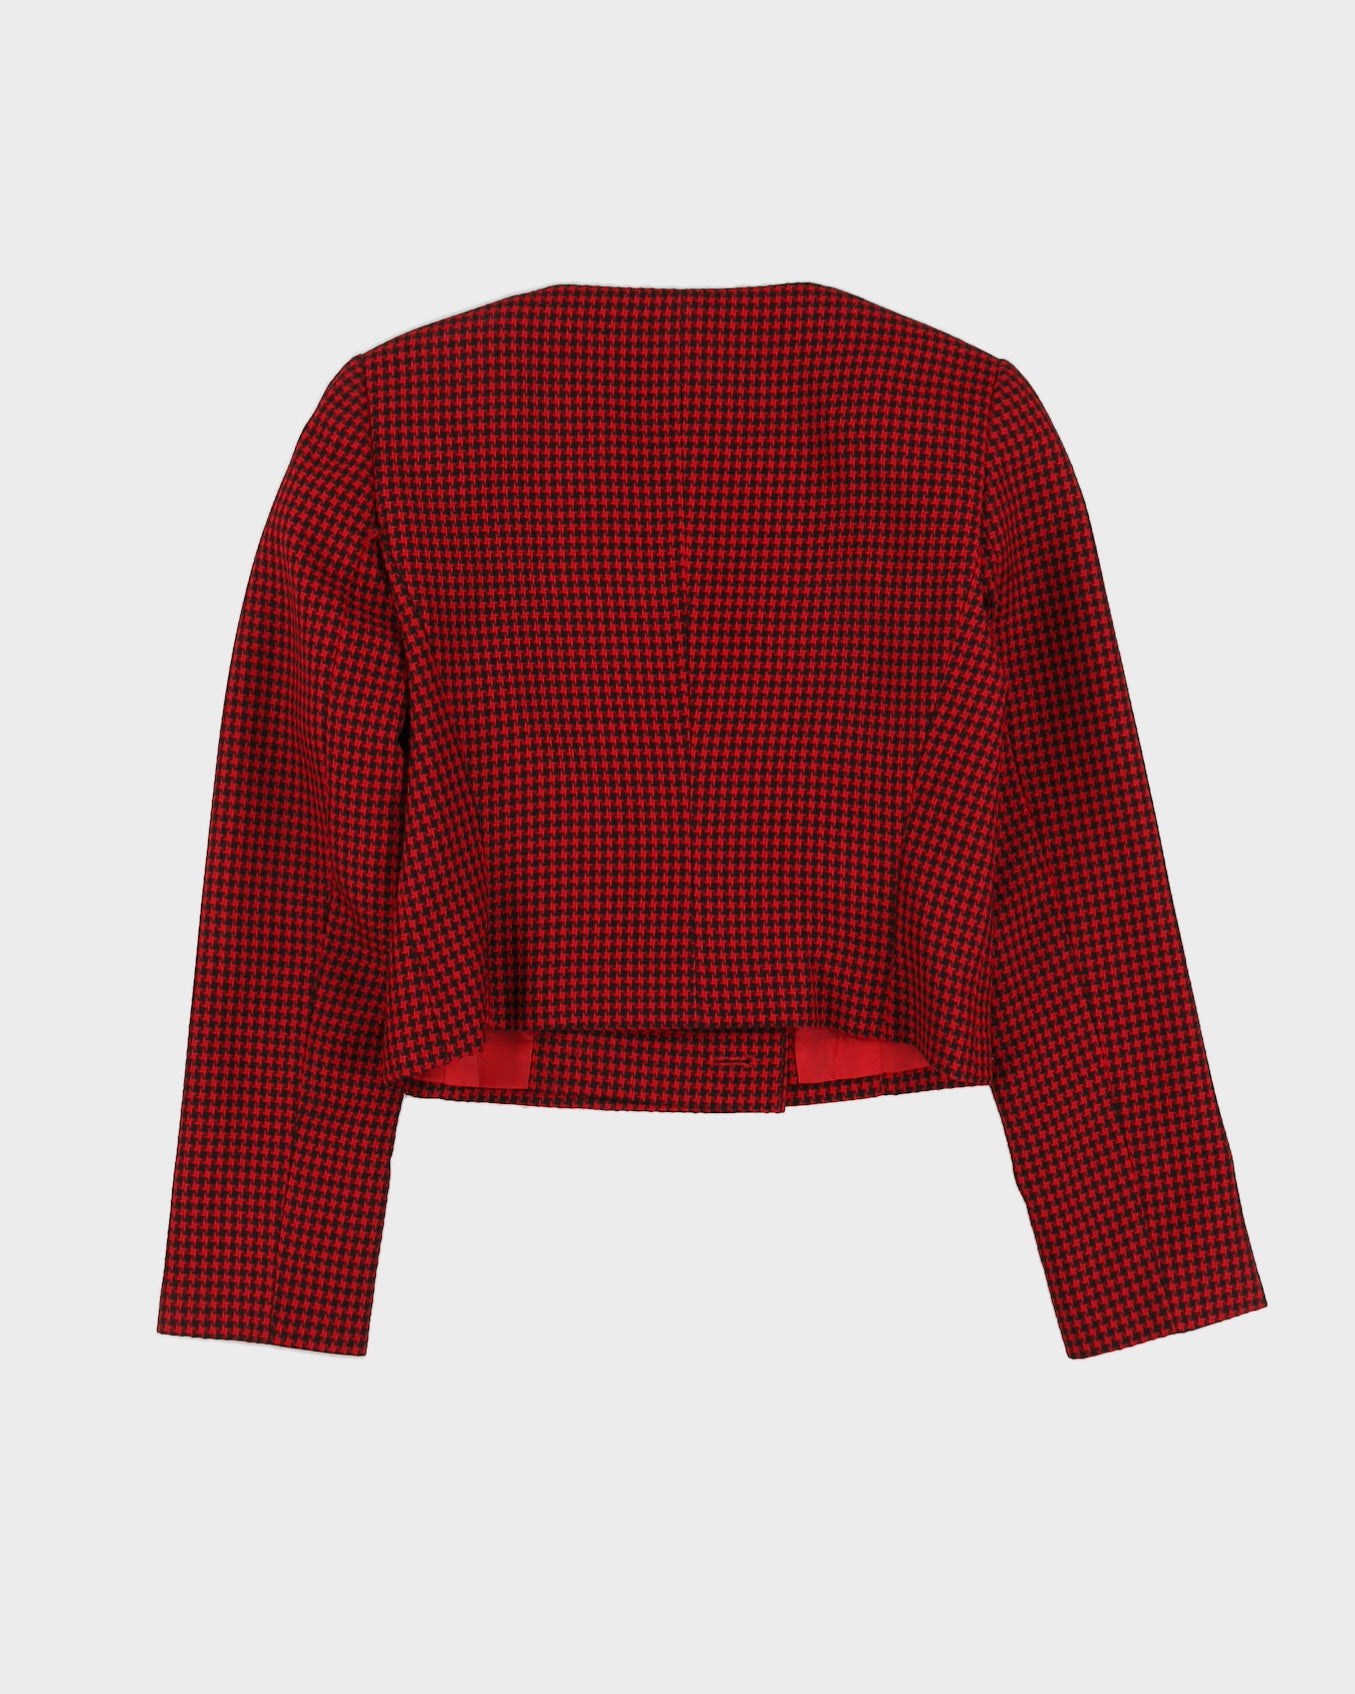 Red And Black Houndstooth  2 Piece Suit - S